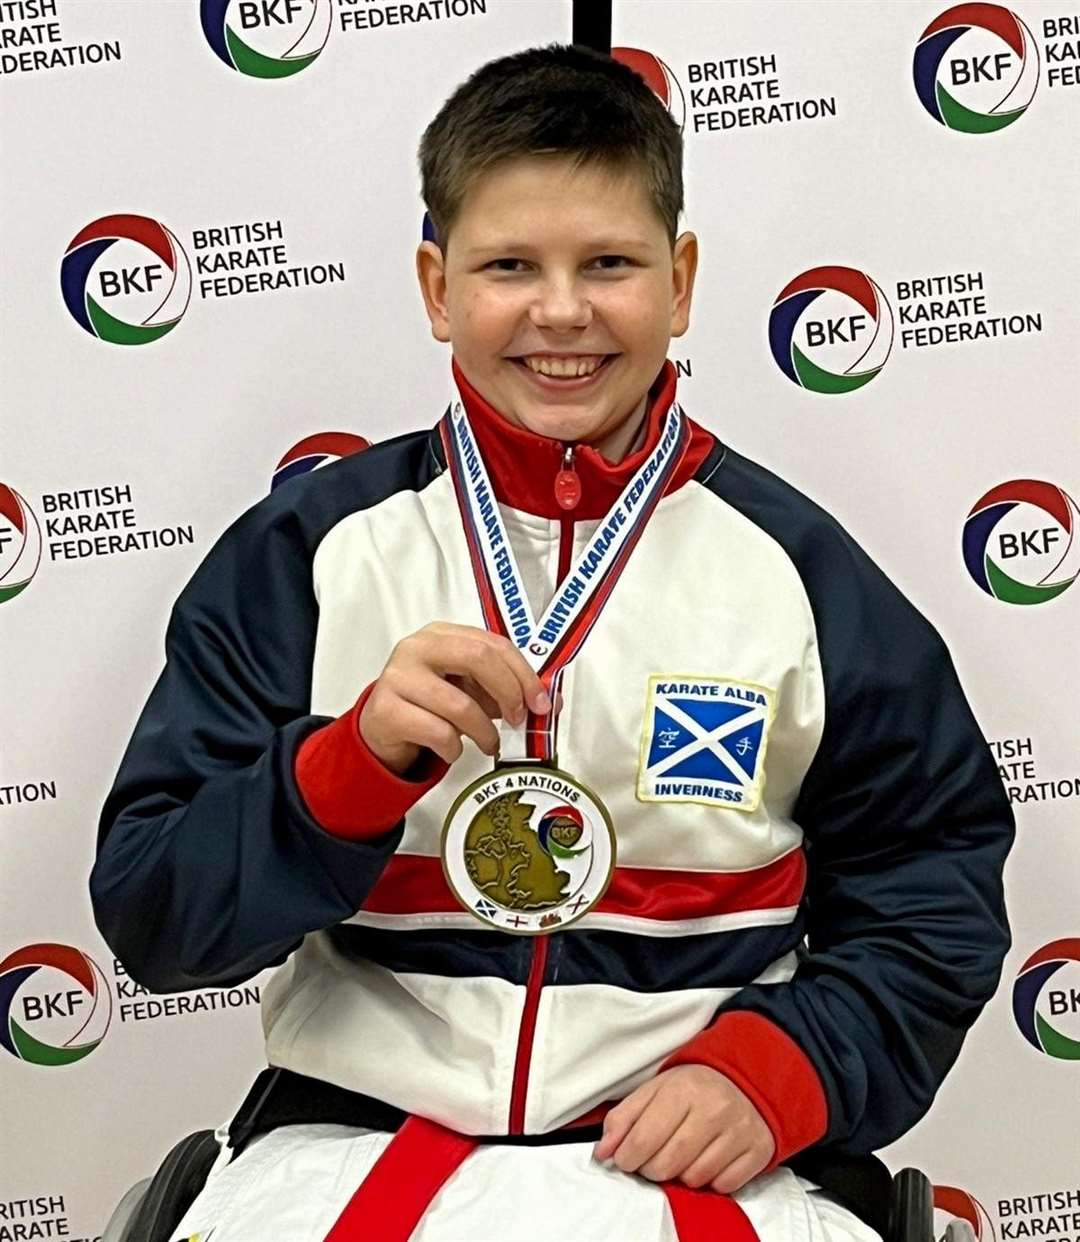 Vilis Forstmanis became British Para Wheelchair Karate champion after winning his fourth consecutive competition.